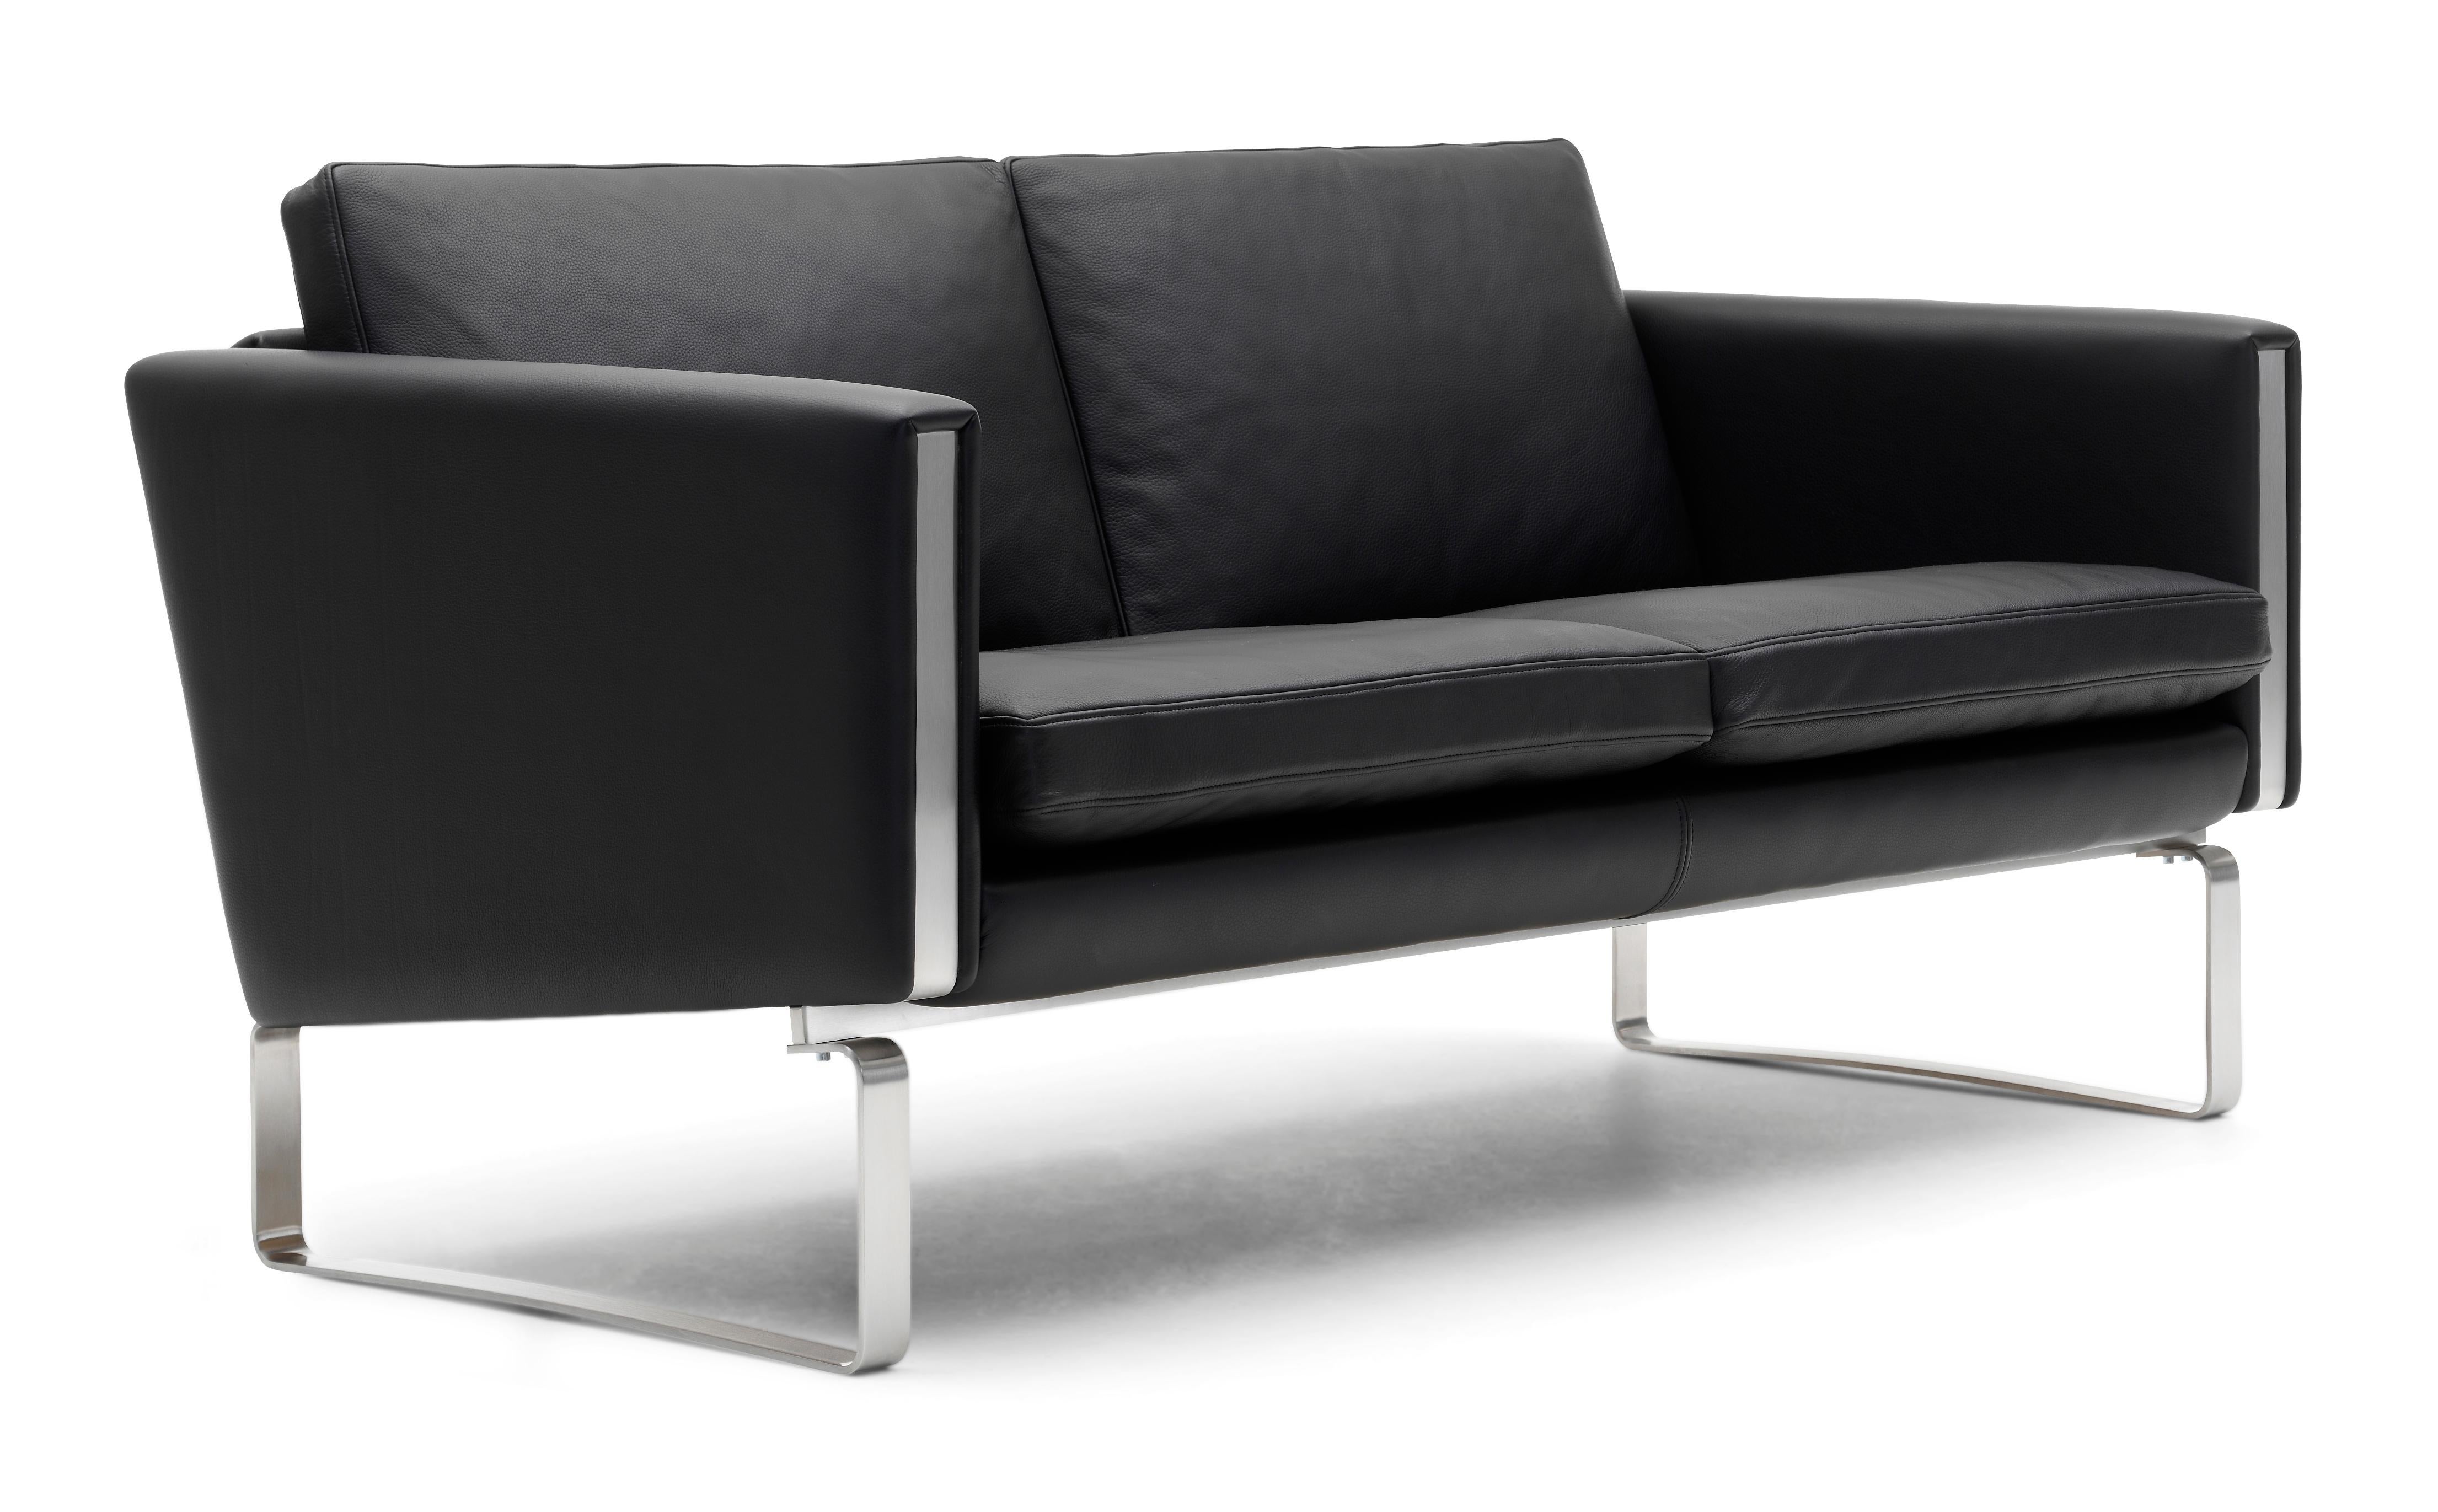 Black (Thor 301) CH102 2-Seat Sofa in Stainless Steel Frame with Leather Seat by Hans J. Wegner 2